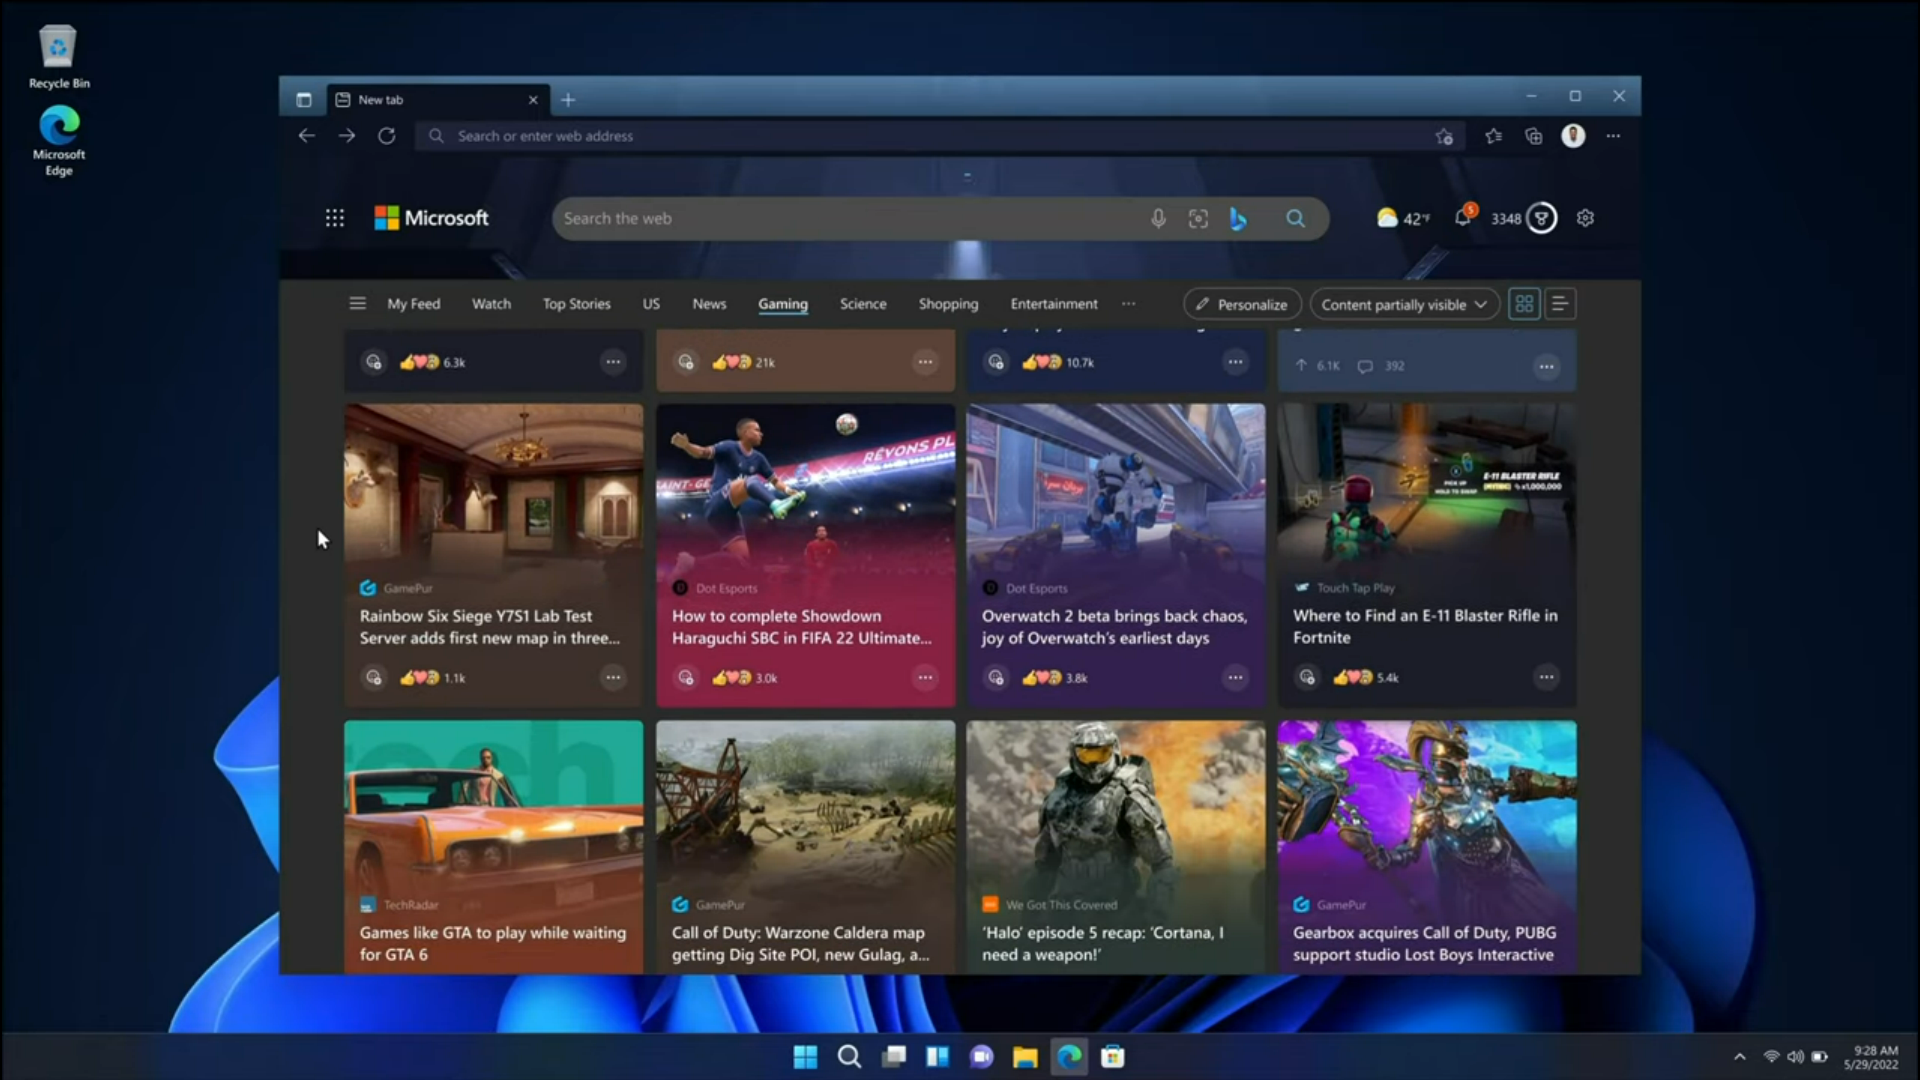 Microsoft Adds Xbox Gaming Features To Edge To Get People To Use It Over Chrome